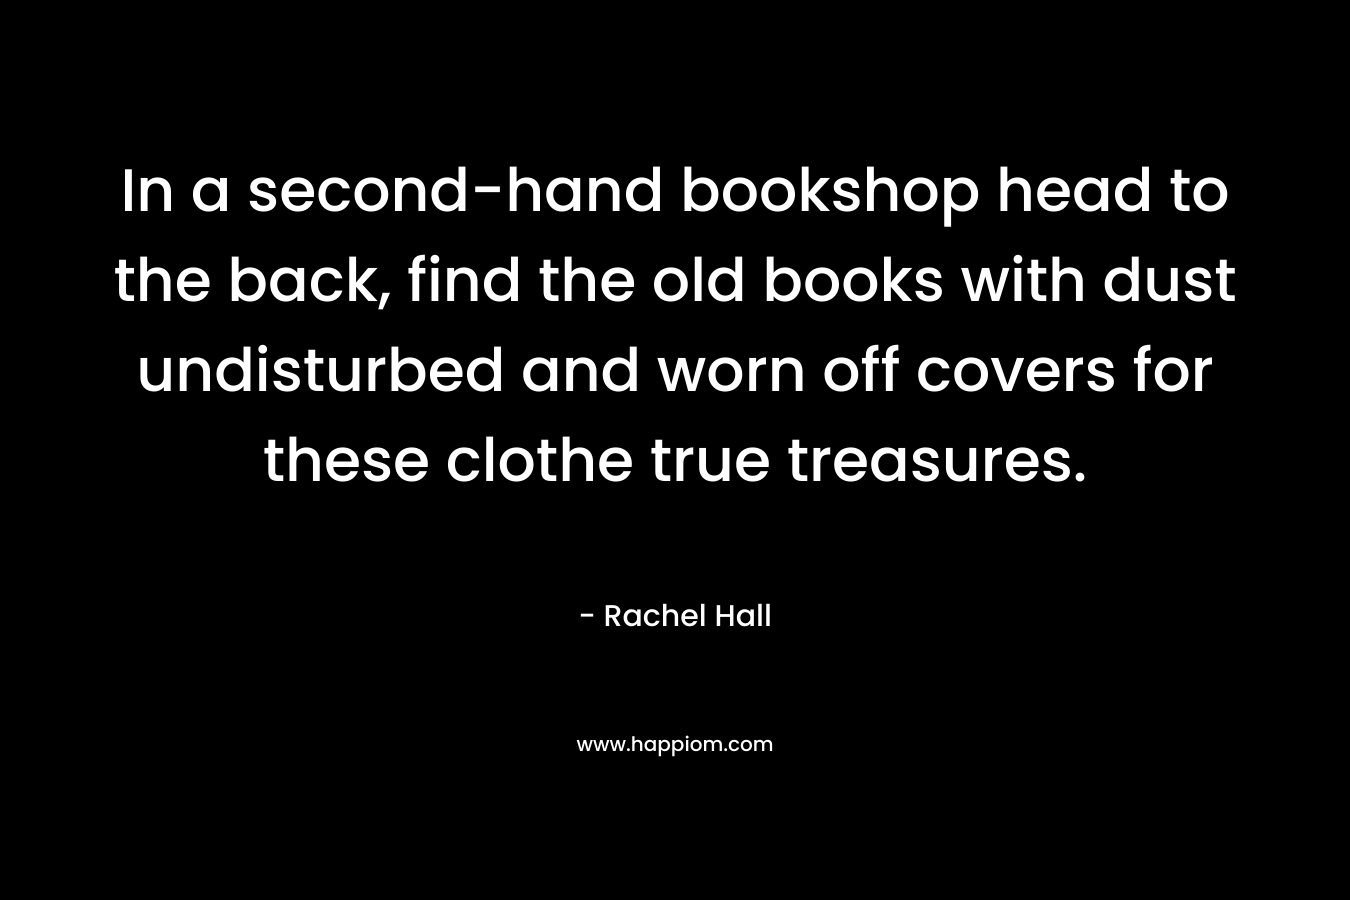 In a second-hand bookshop head to the back, find the old books with dust undisturbed and worn off covers for these clothe true treasures. – Rachel Hall